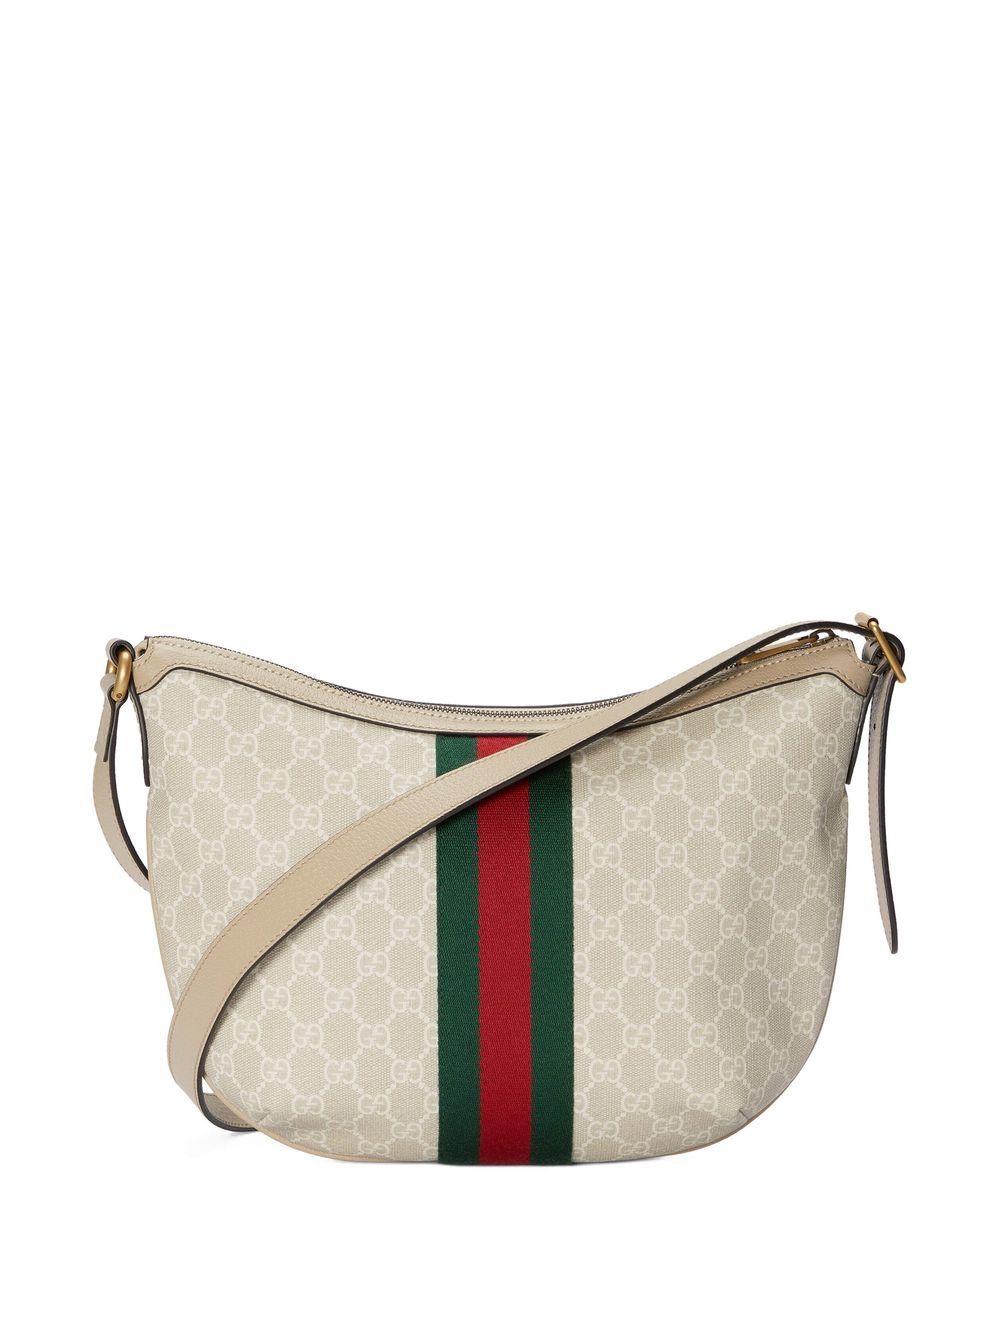 Gucci Ophidia Gg Small Shoulder Bag In White